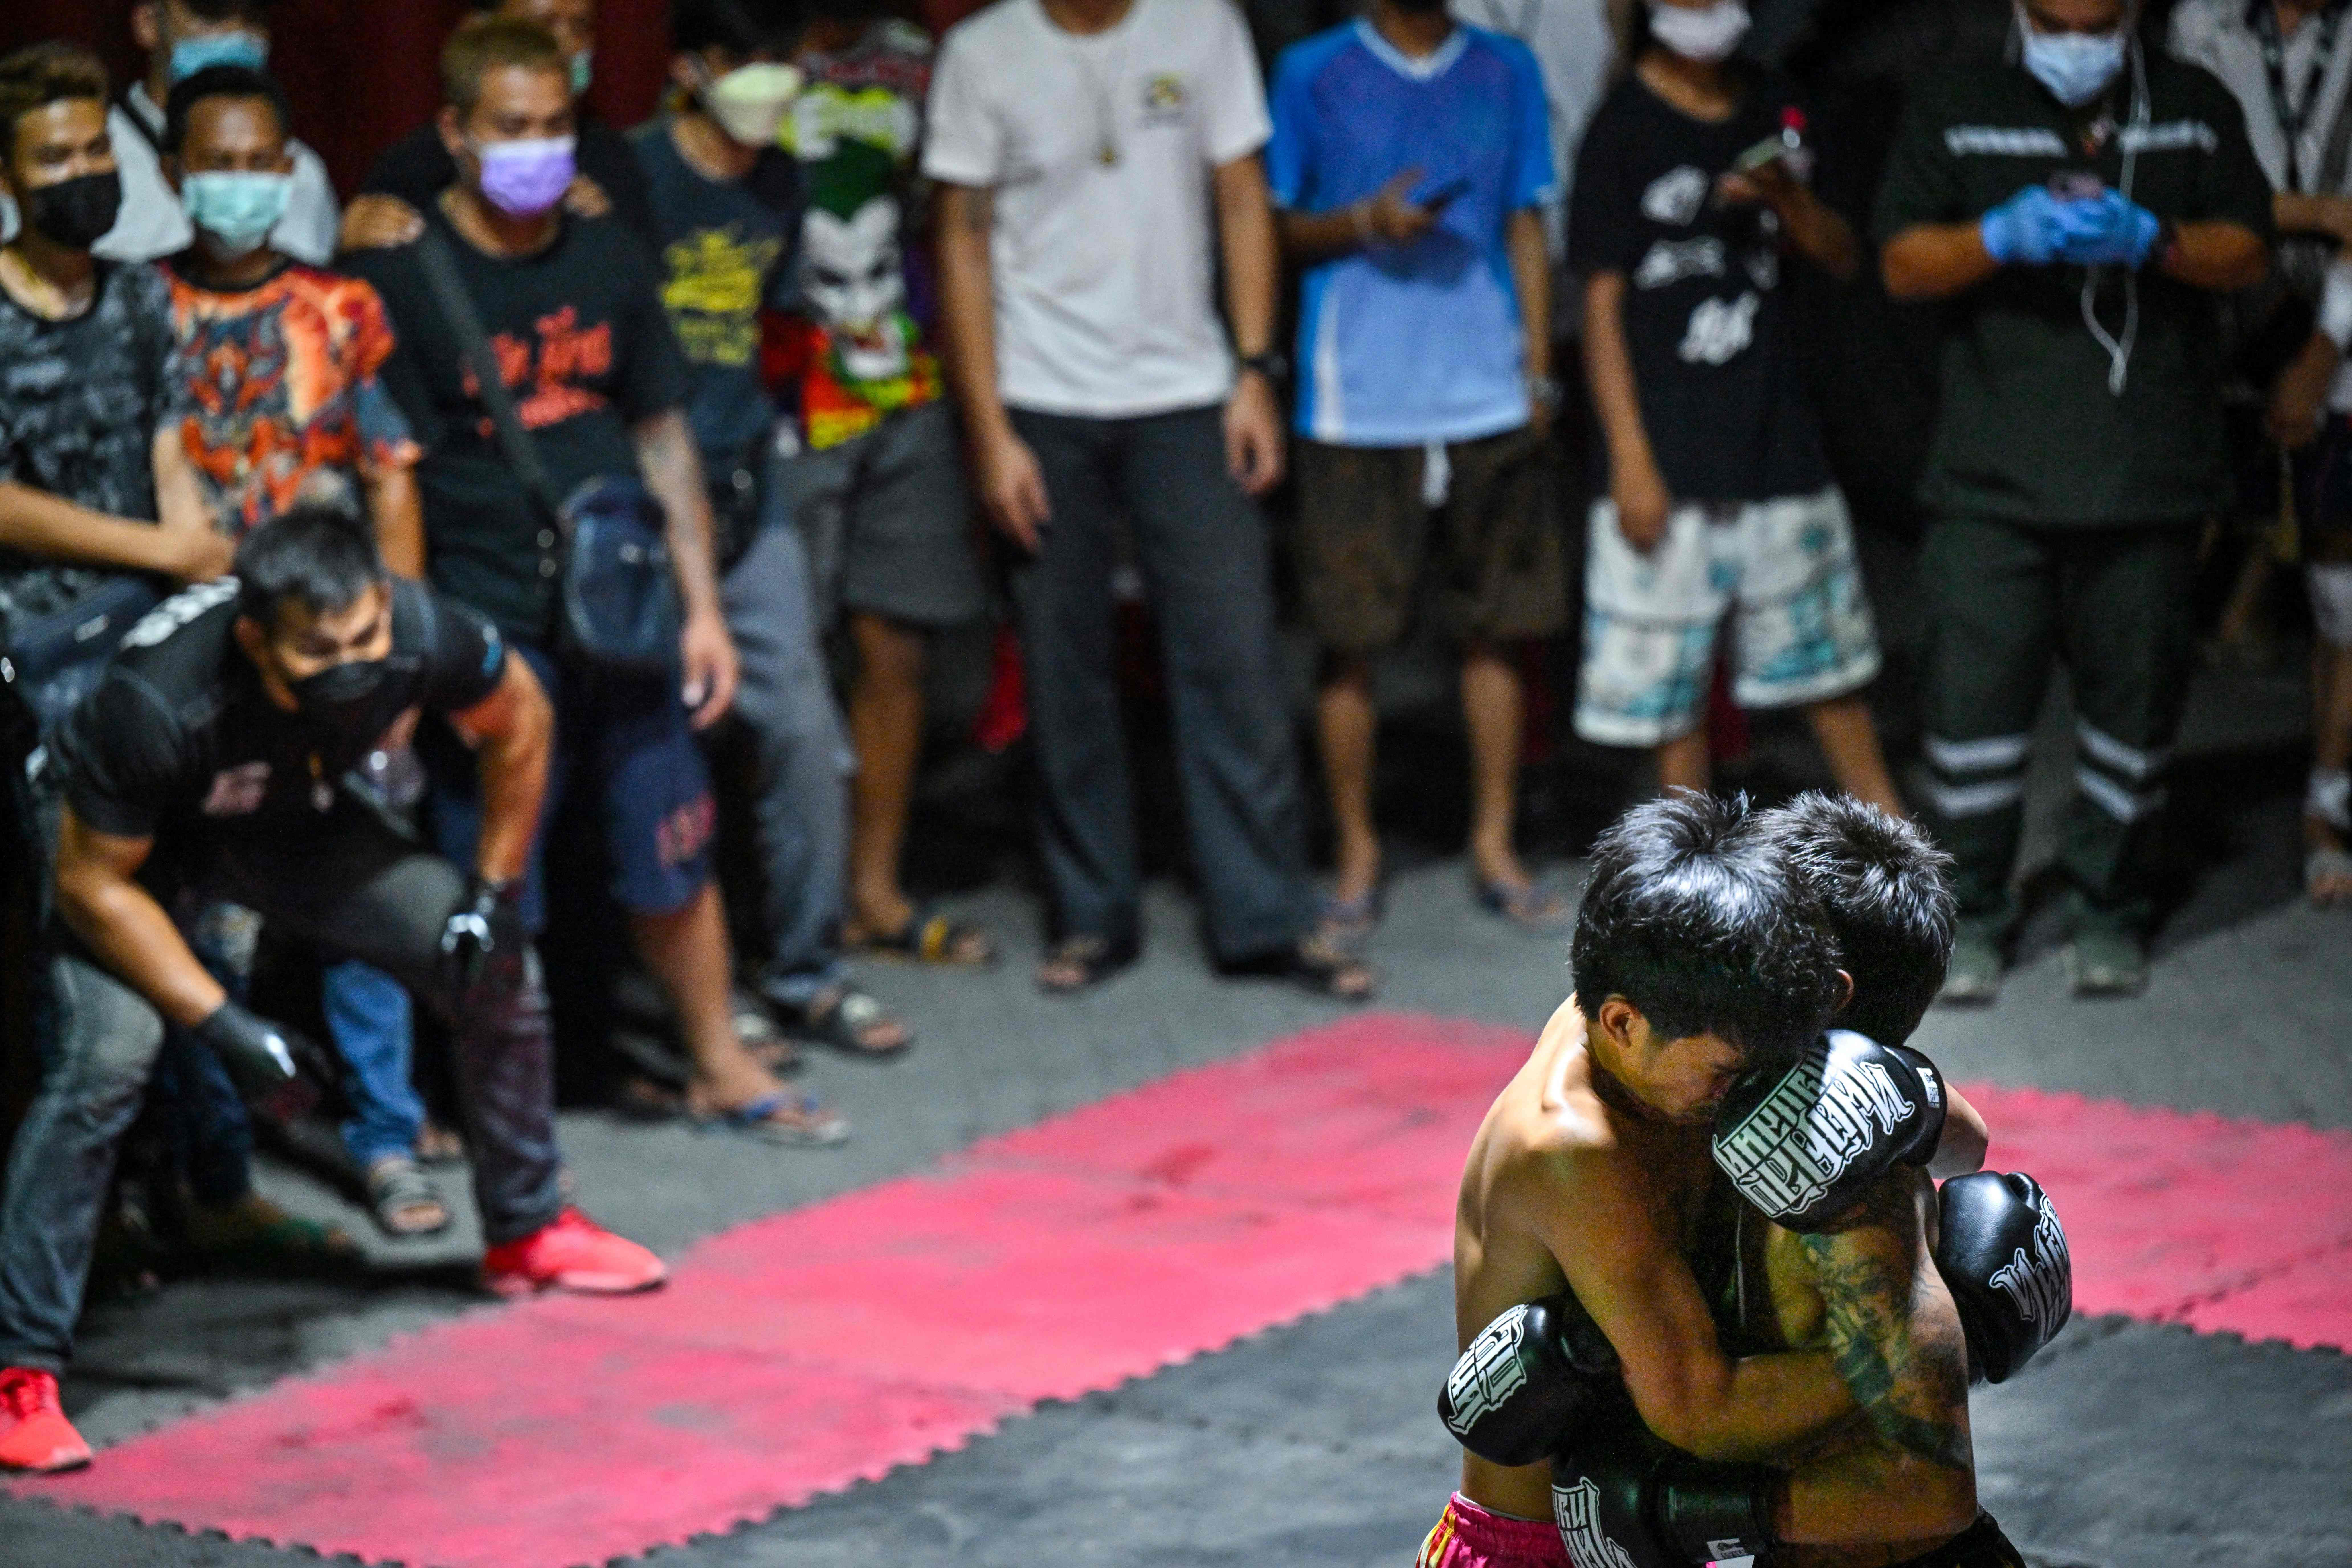 This photo shows combatants competing in Muay Thai at an event by Fight Club Thailand, an underground organization that hosts unsanctioned fights of various martial arts disciplines, in a parking lot in the Klong Toey district of Bangkok.